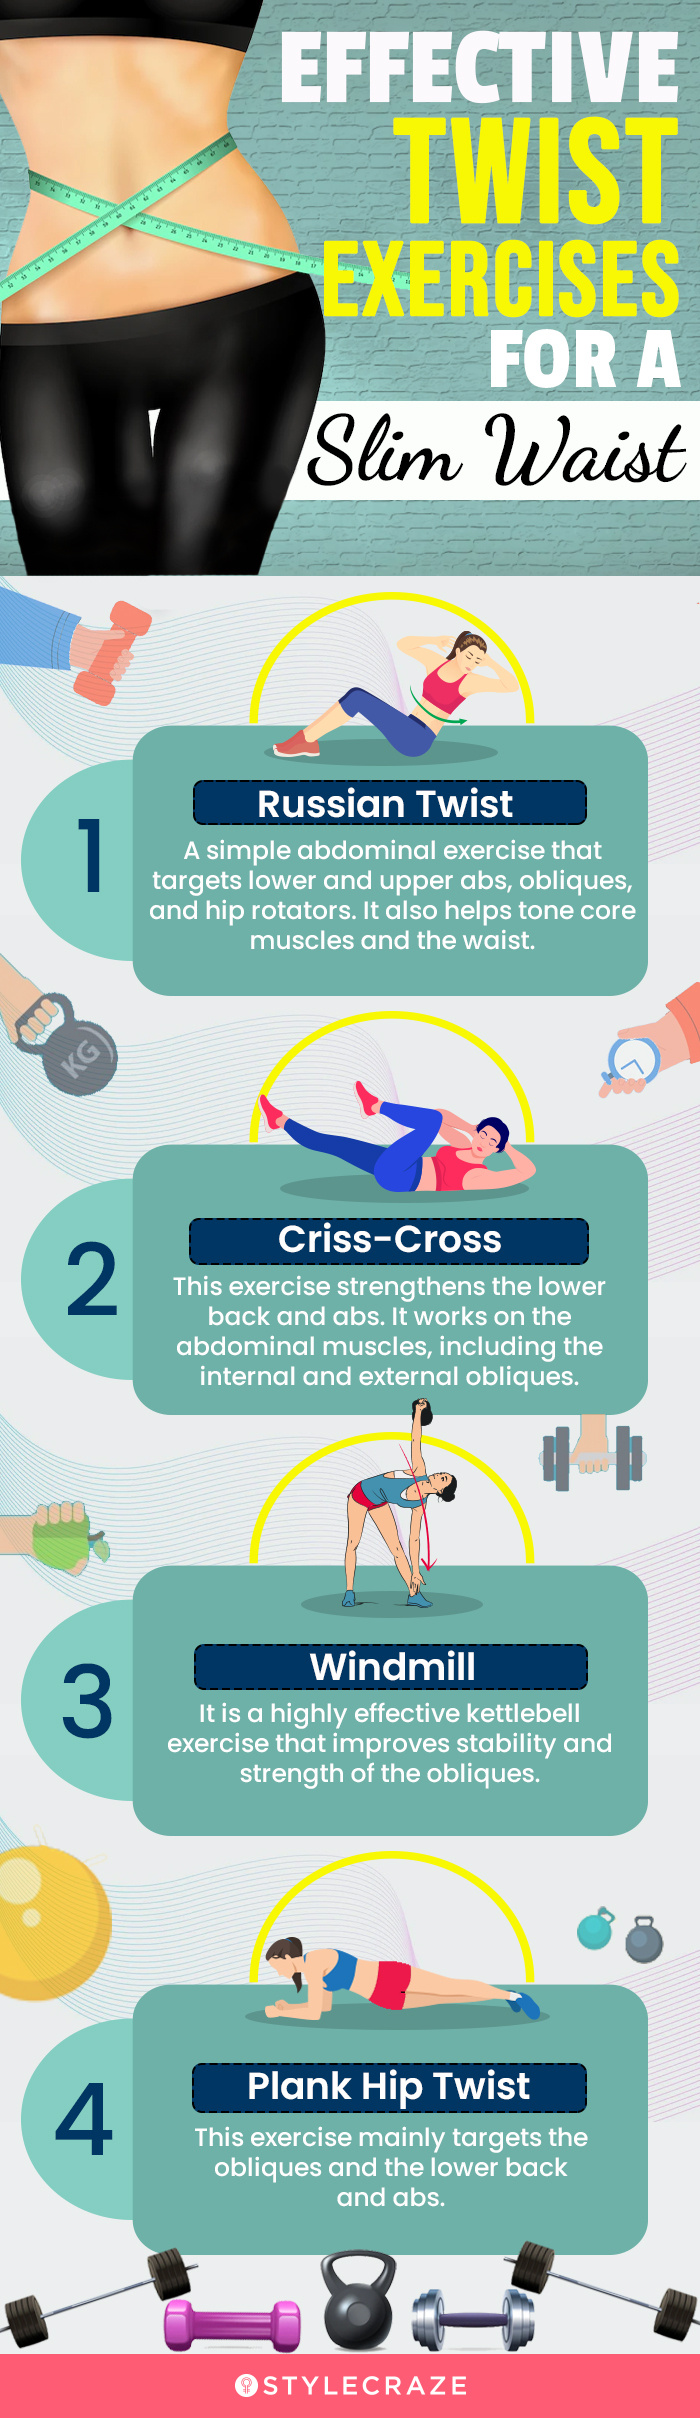 effective twist exercises for a slim waist (infographic)